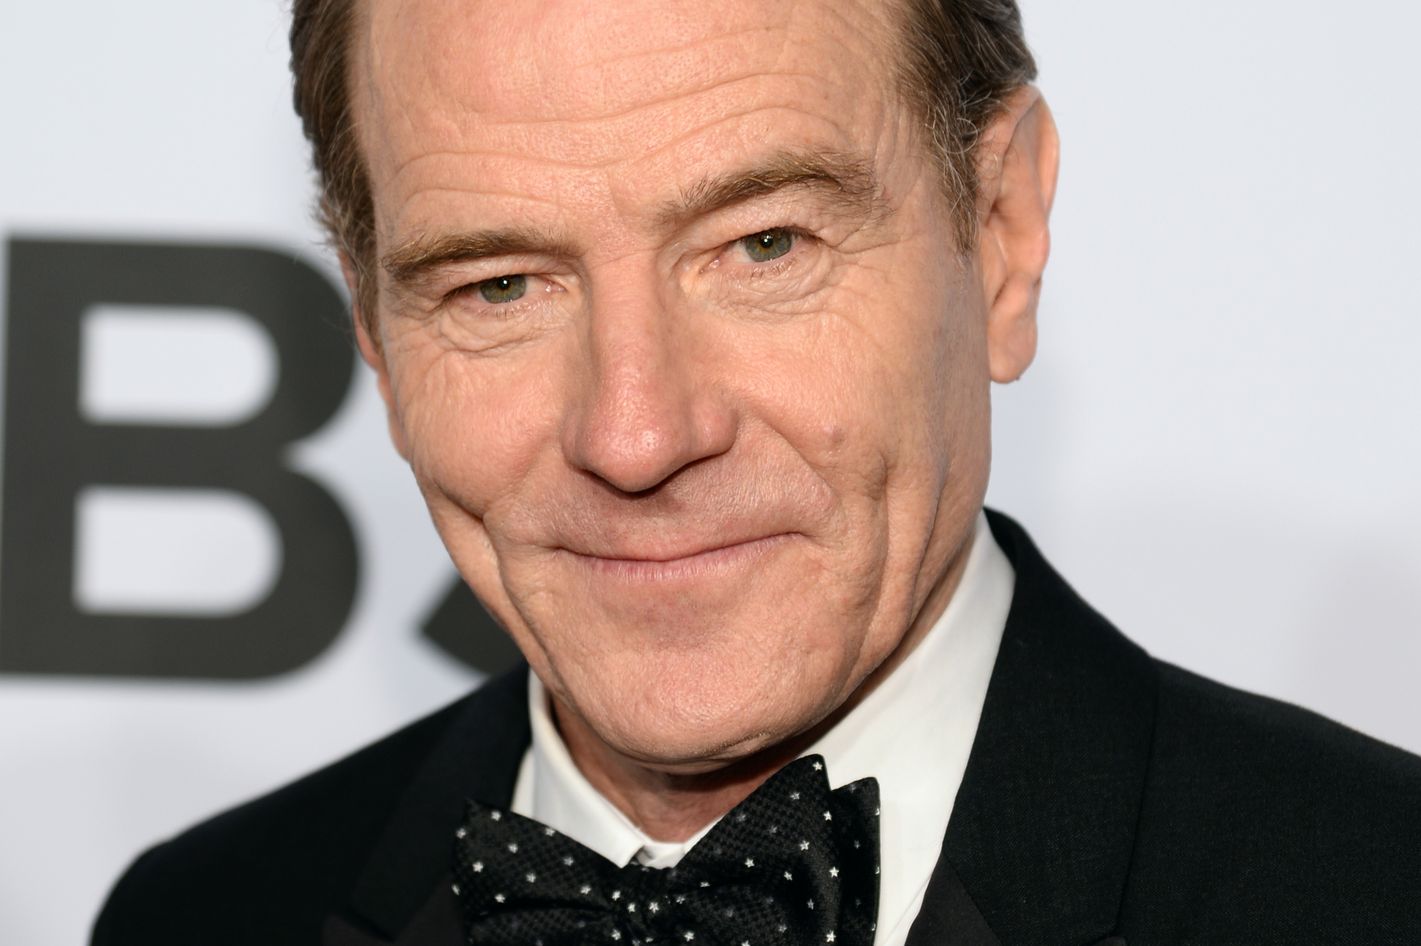 Bryan Cranston says Malcolm in the Middle movie talks are happening